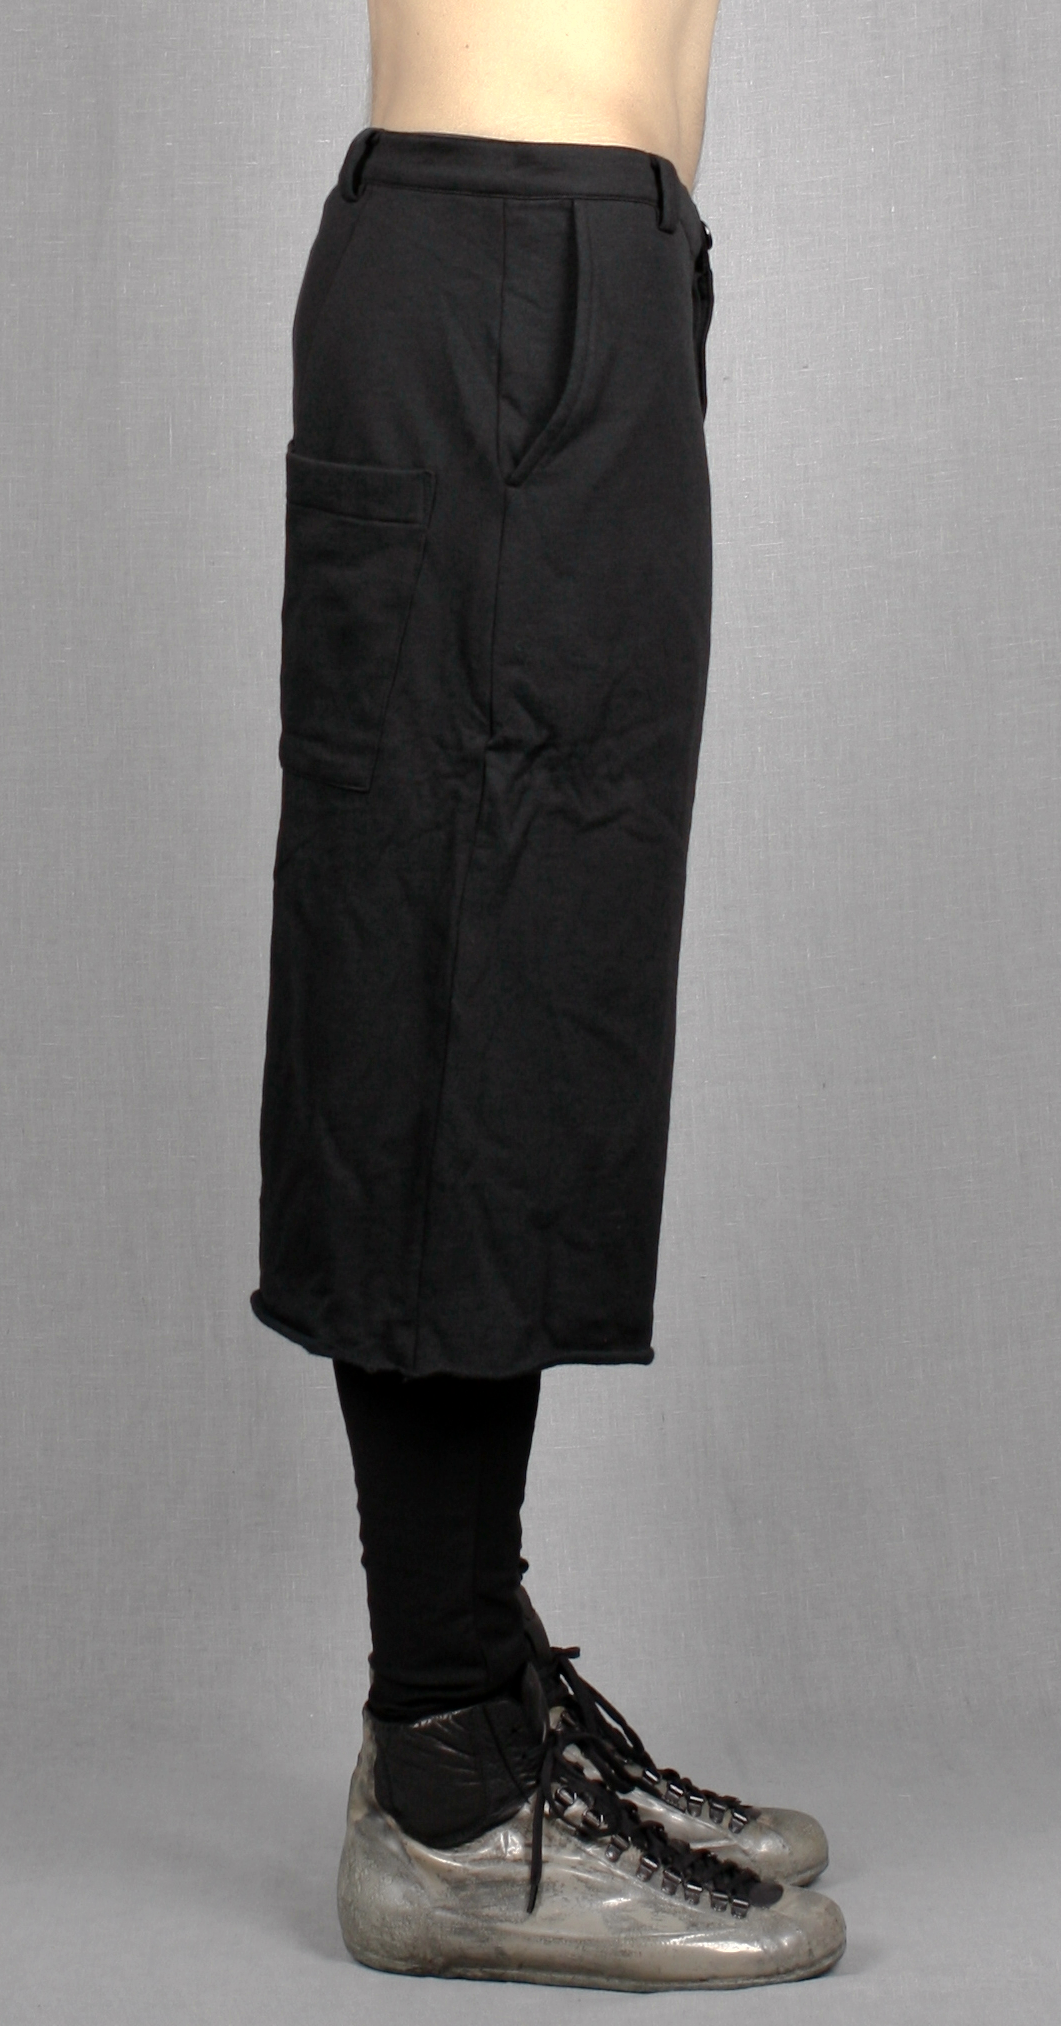 Biker Black Long Shorts with a Drop Crotch and Tapered Leg